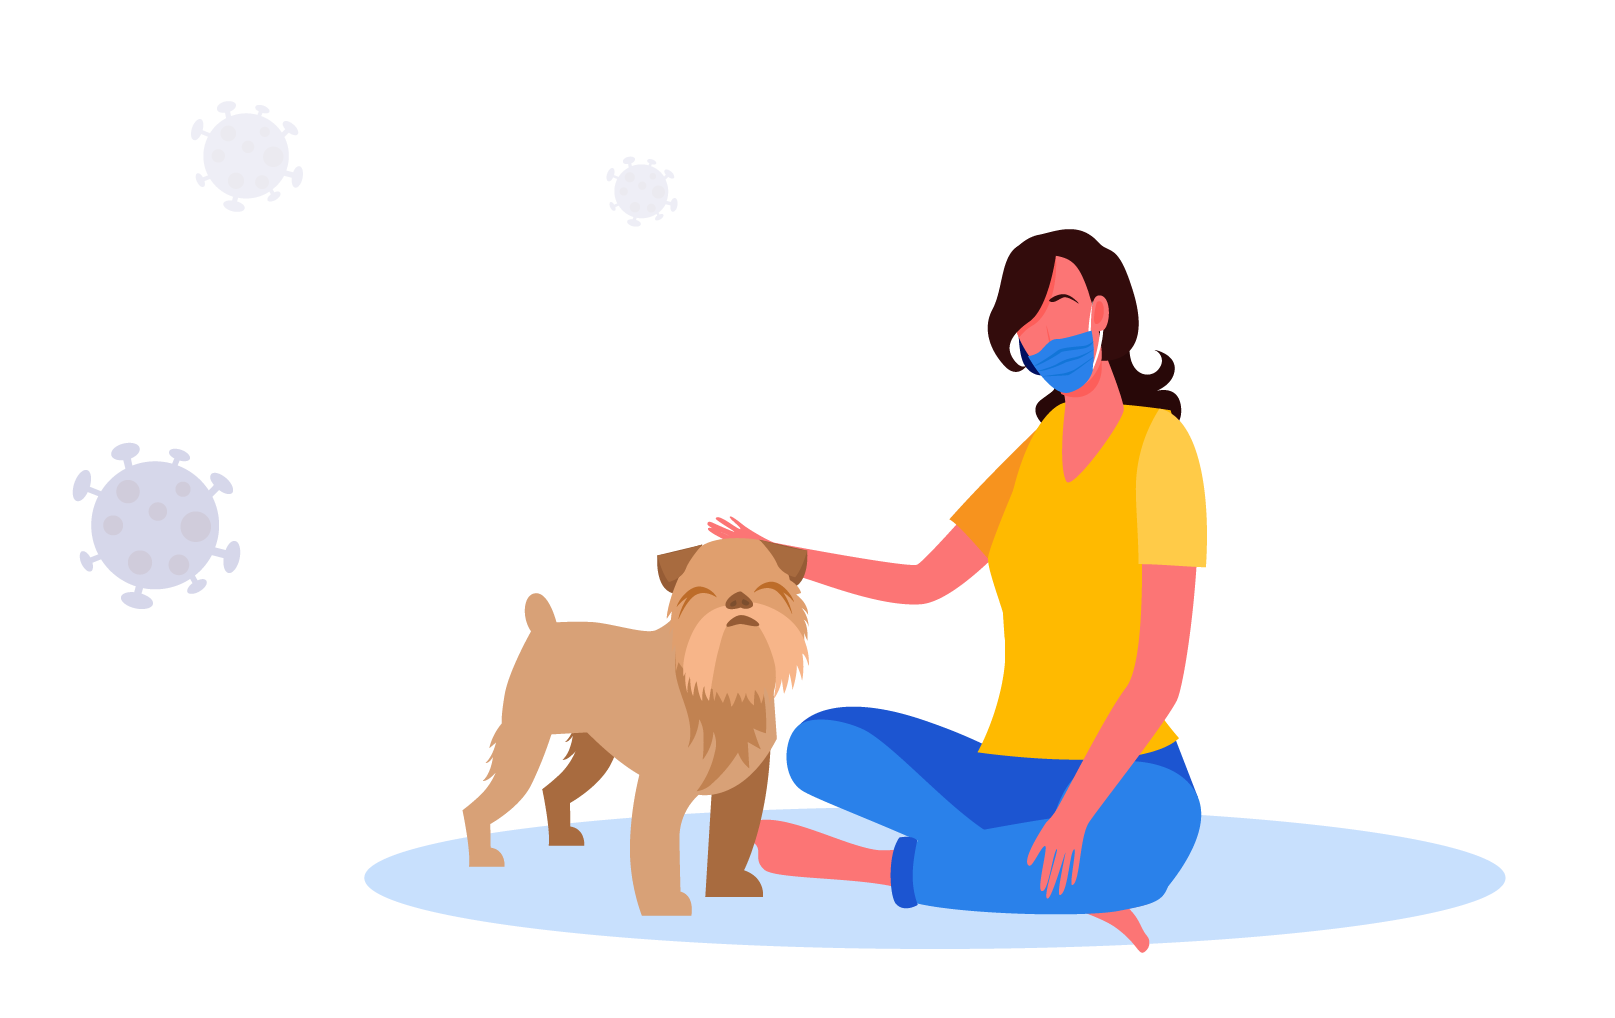 Animated graphic of girl with surgical mask petting dog